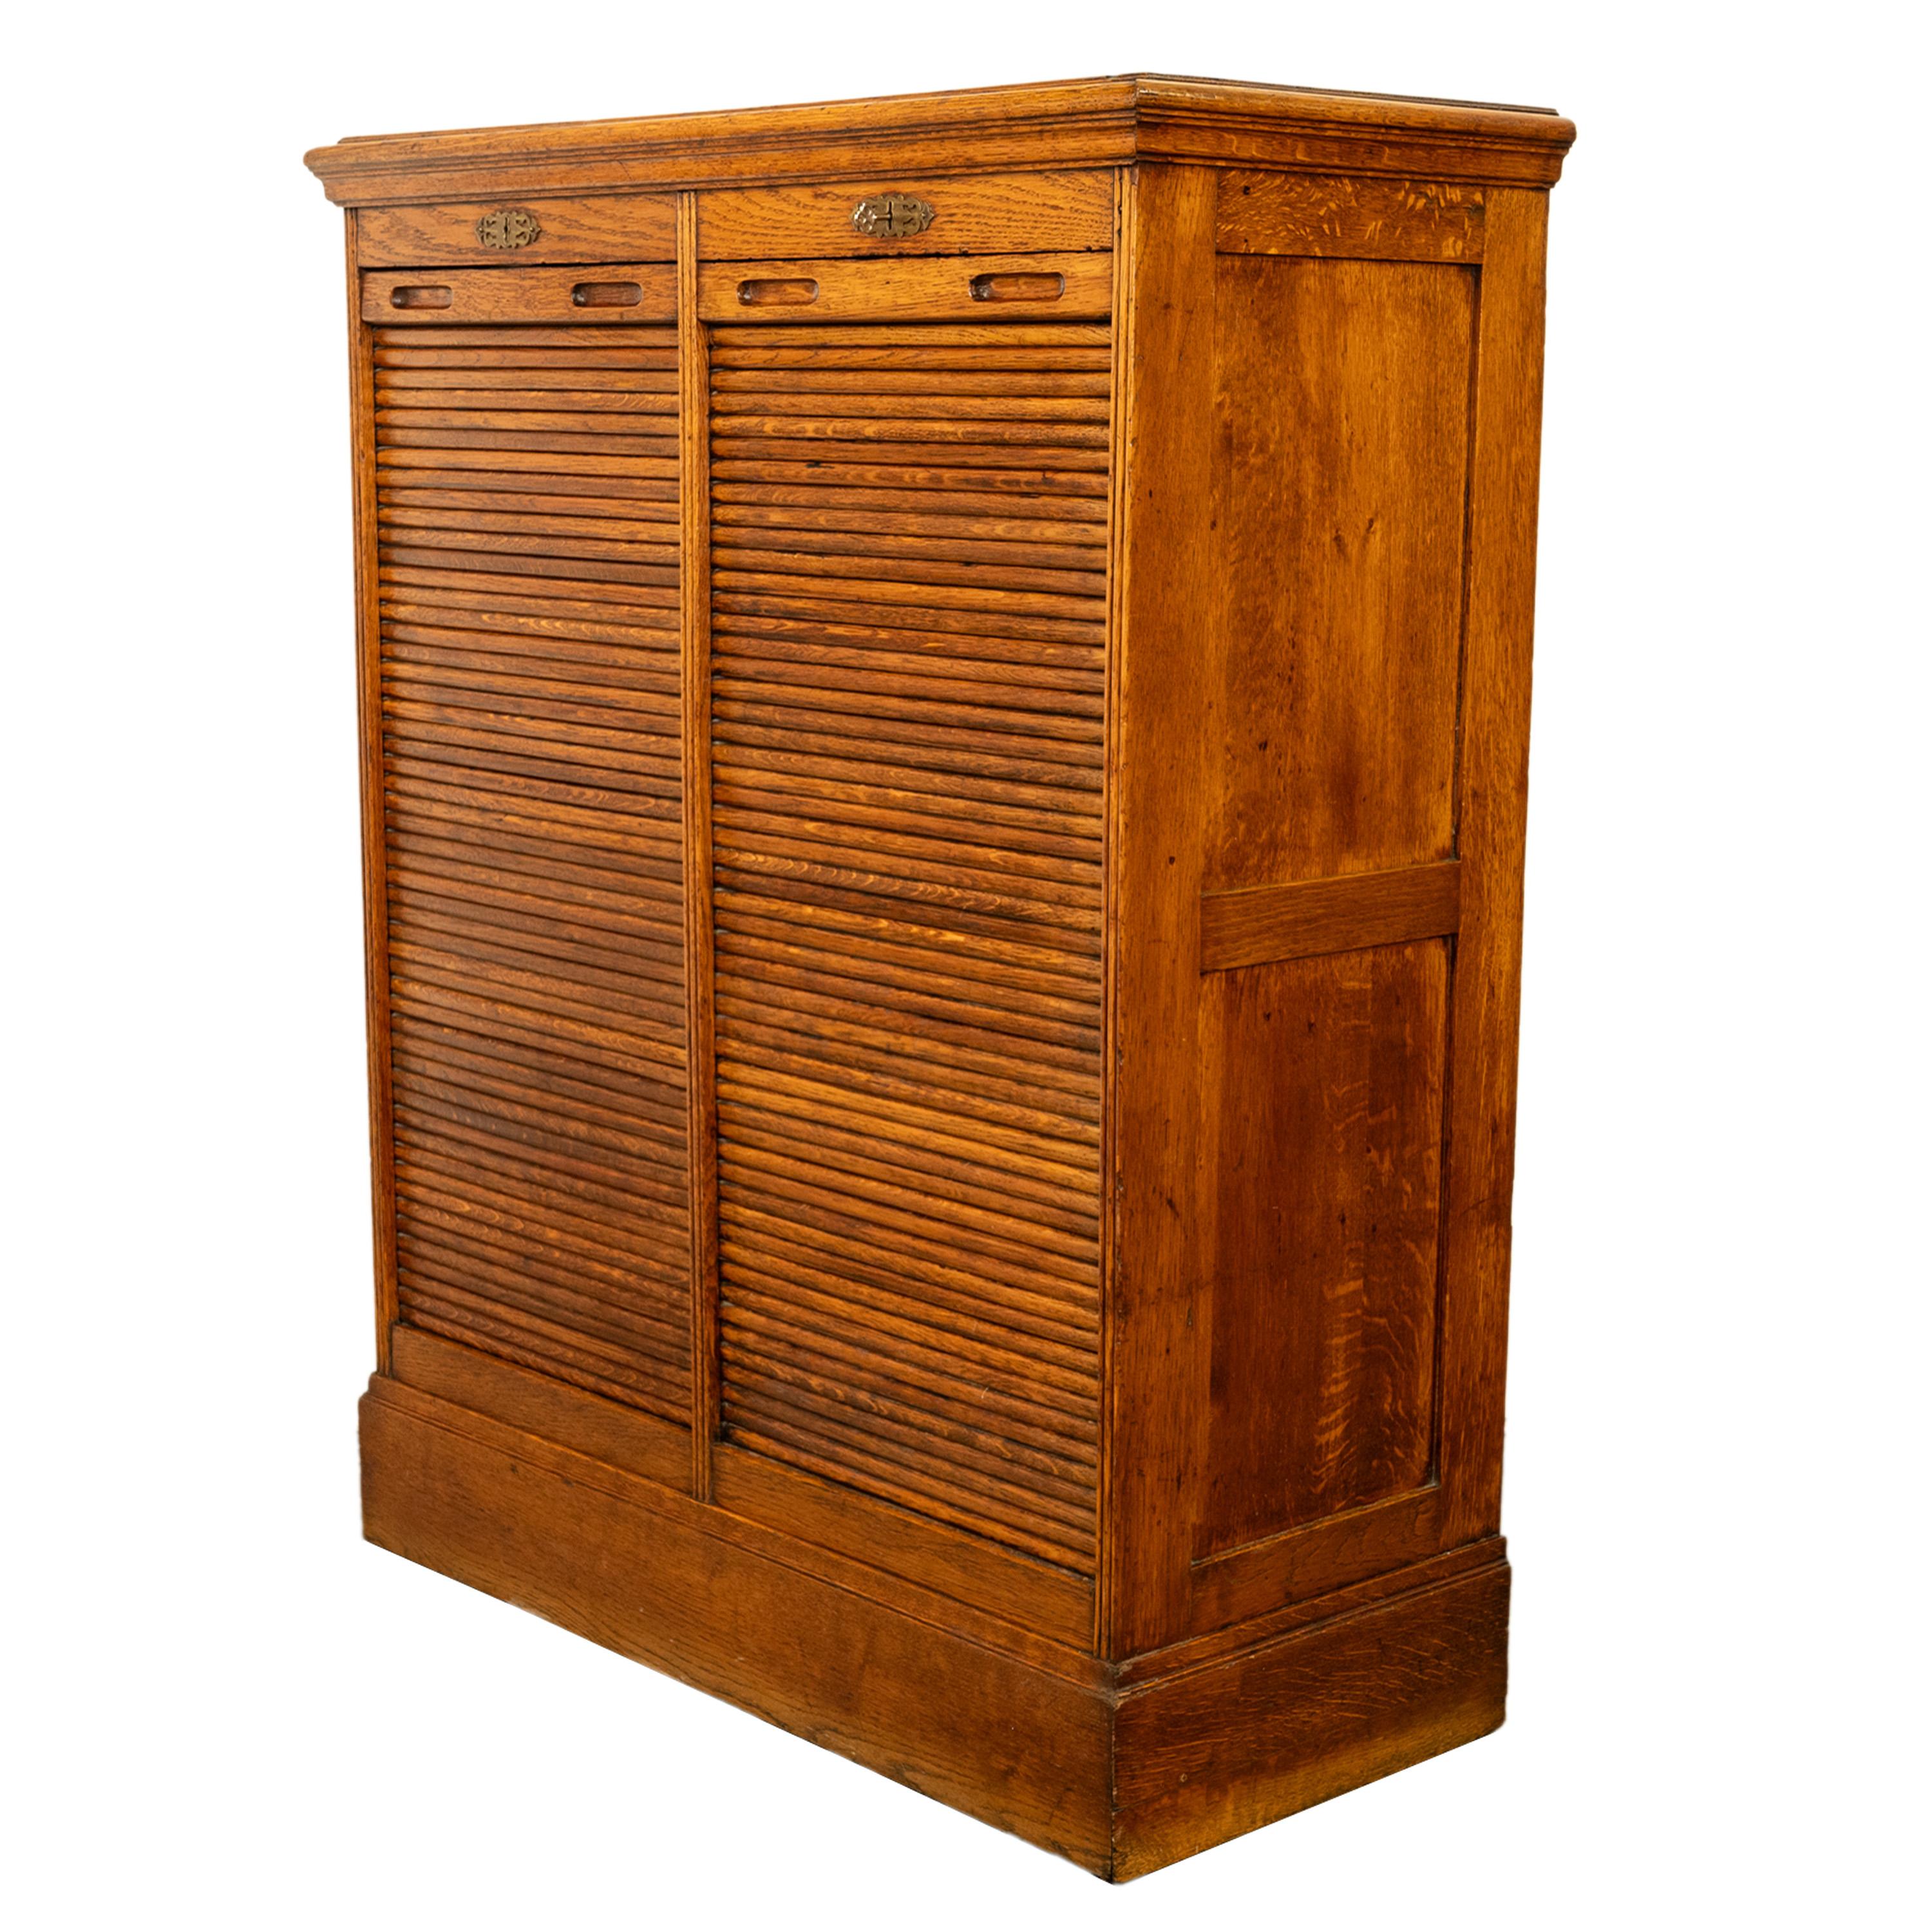 A good antique American oak double tambour roll top locking filing cabinet, circa 1910.
The cabinet having two tambour roll fronts that open and move with ease (please see video attached) , the original key is present, each tambour roll encloses